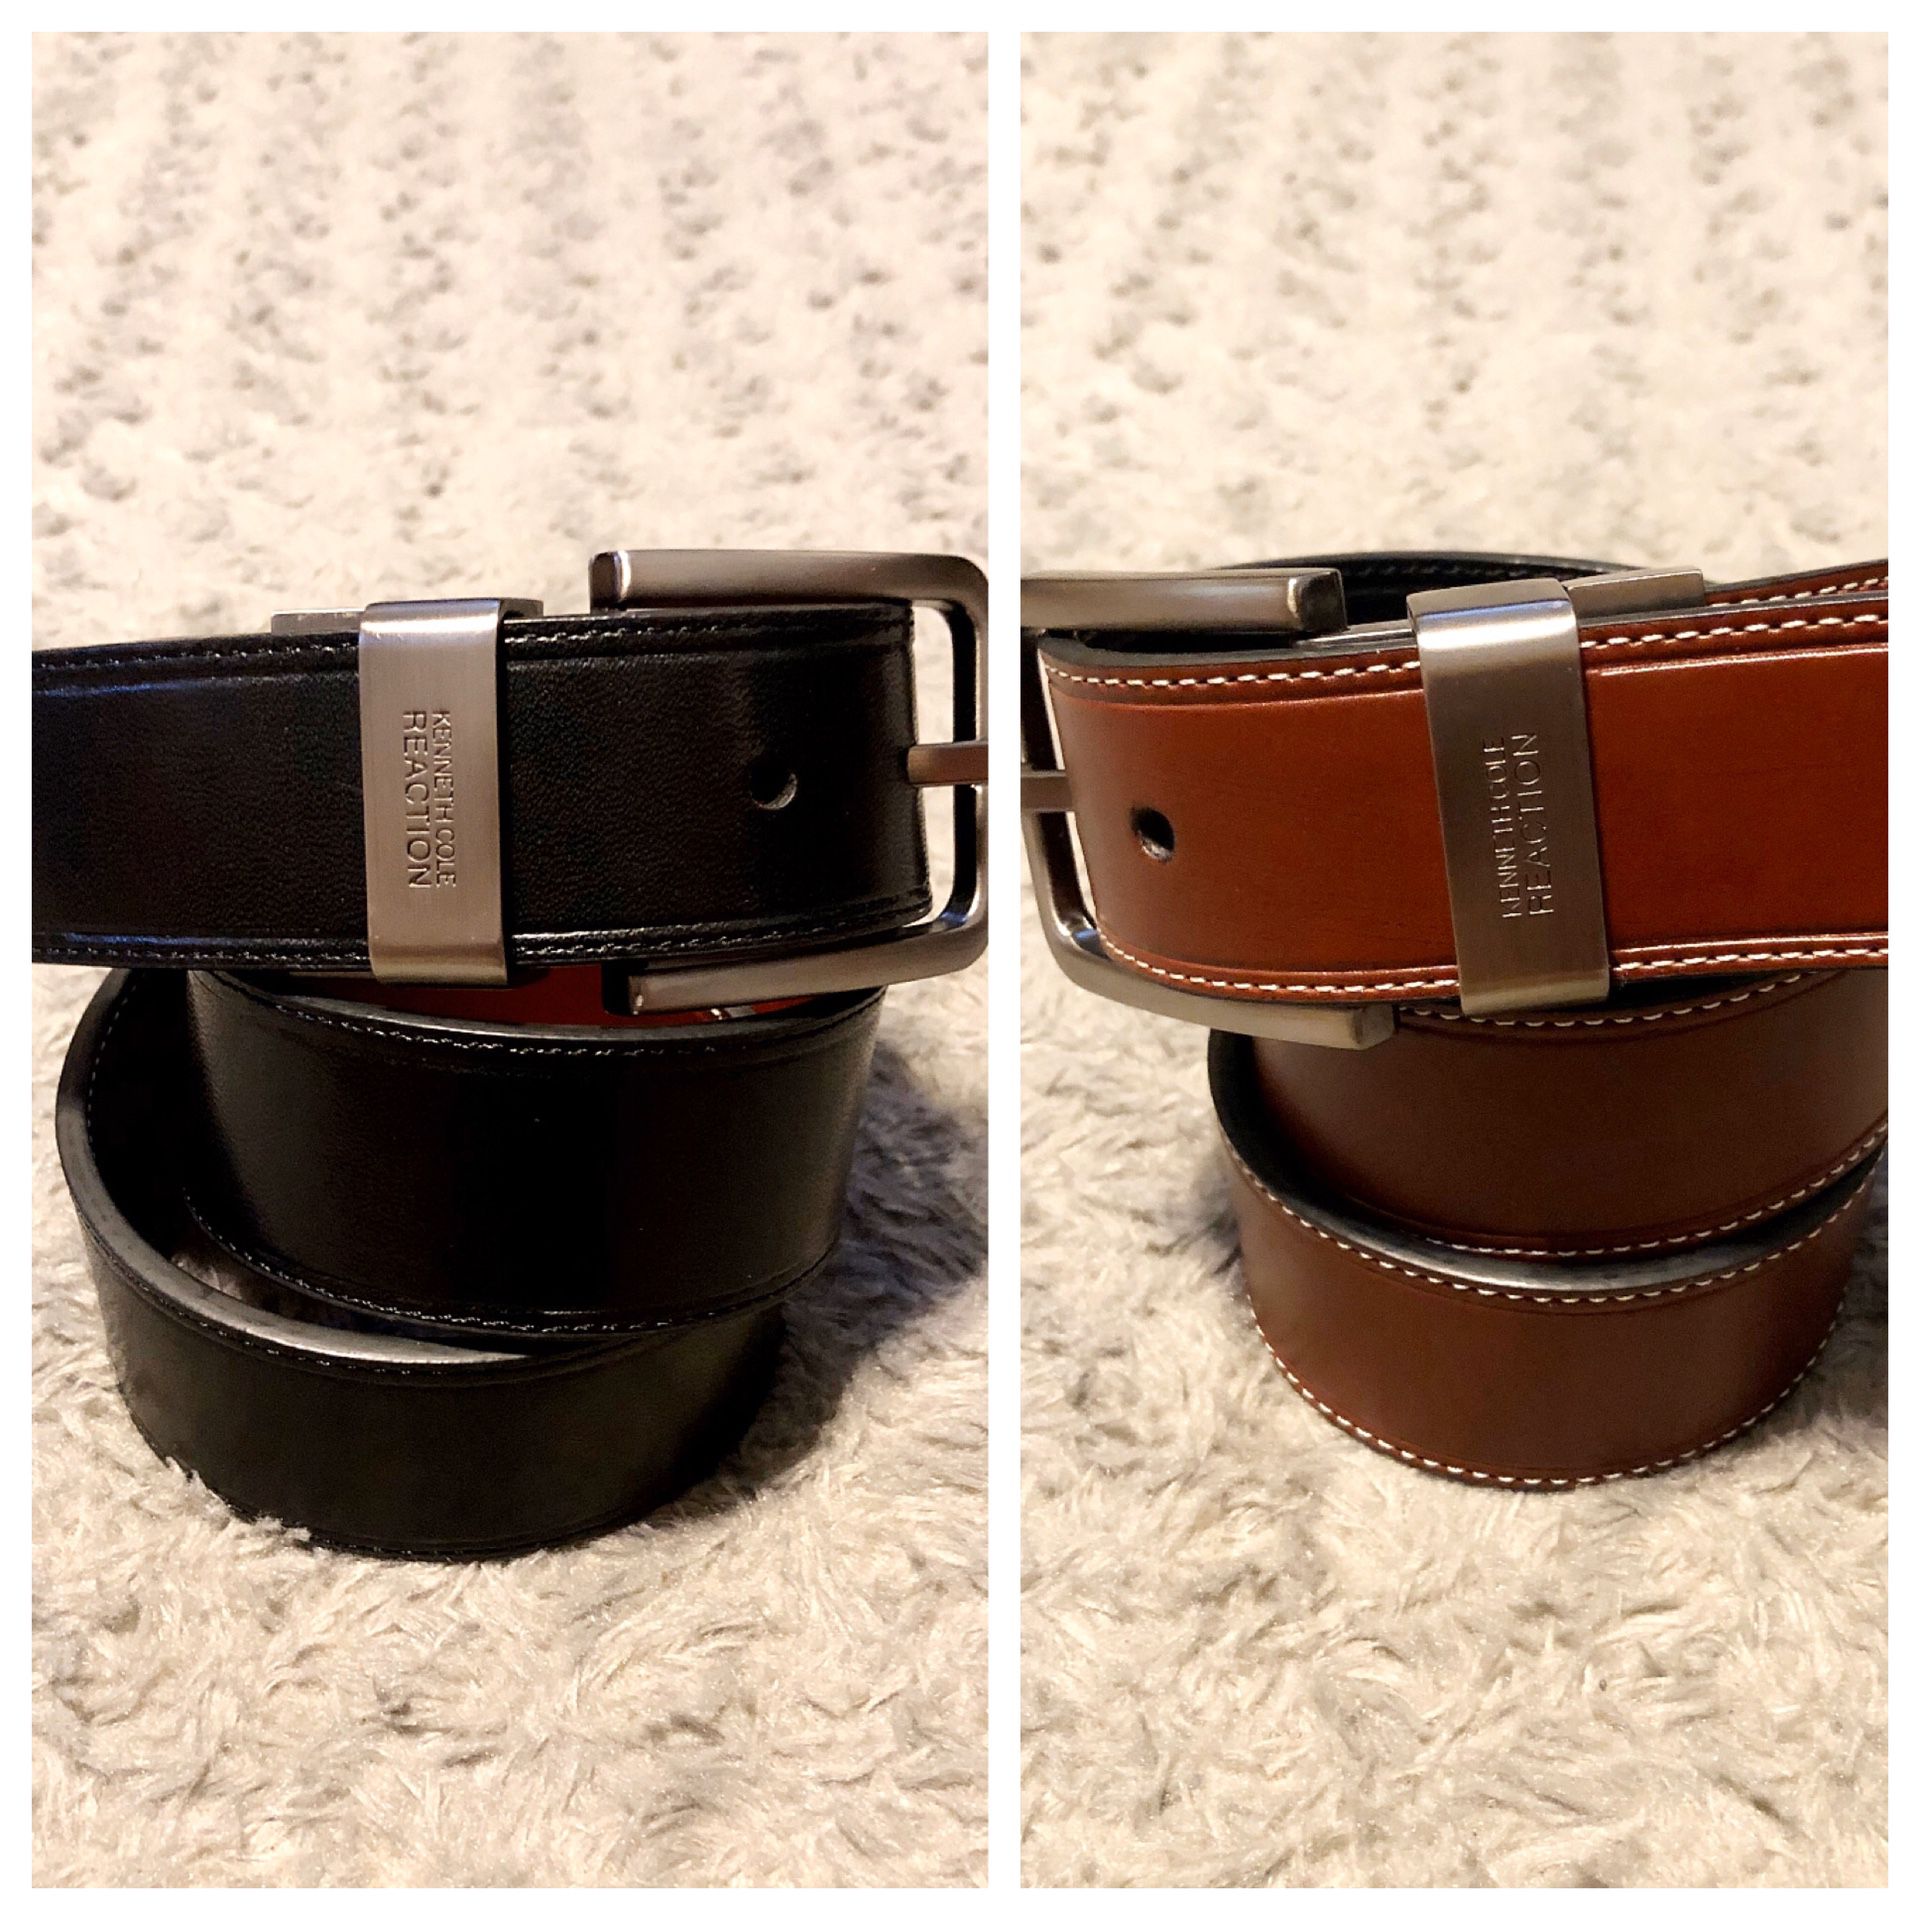 New! Men’s Kenneth Cole belt paid $40 size 32 Medium. Fully reversible Black & brown leather. Brand new never worn! 40in total length.